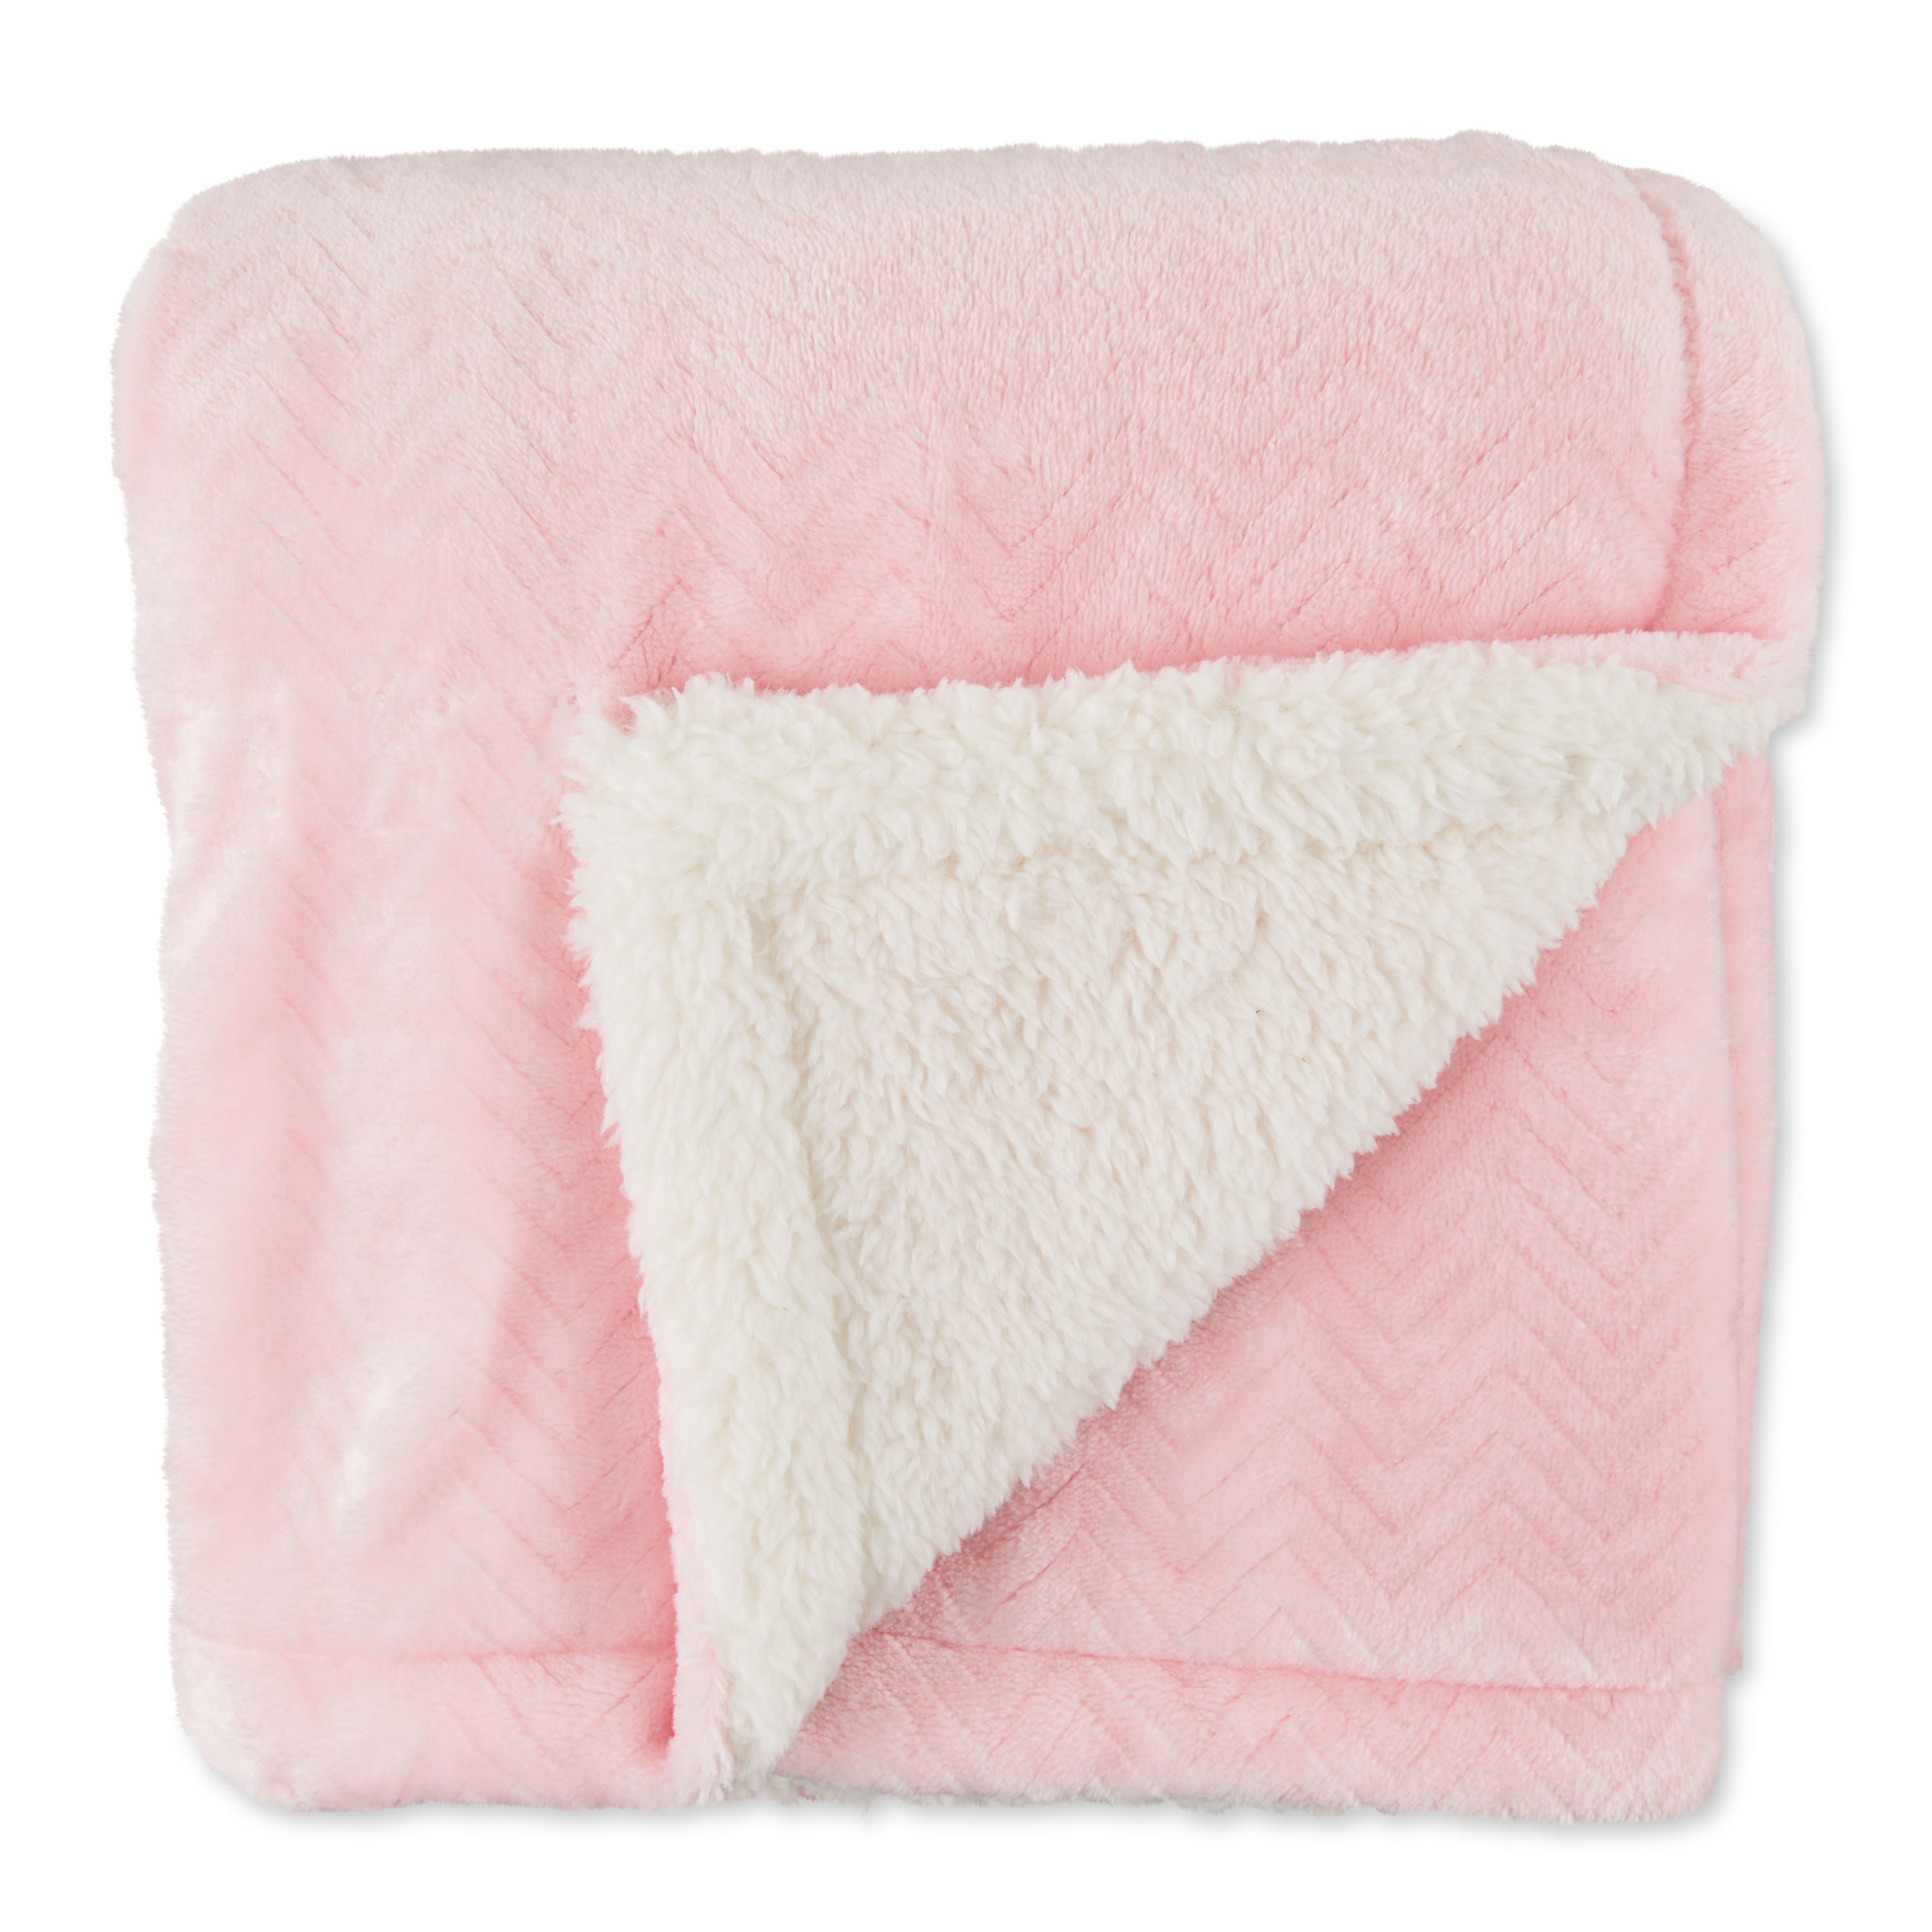 Parent's Royal Plush Blanket for Baby Girls, Pink, 30" x 40"